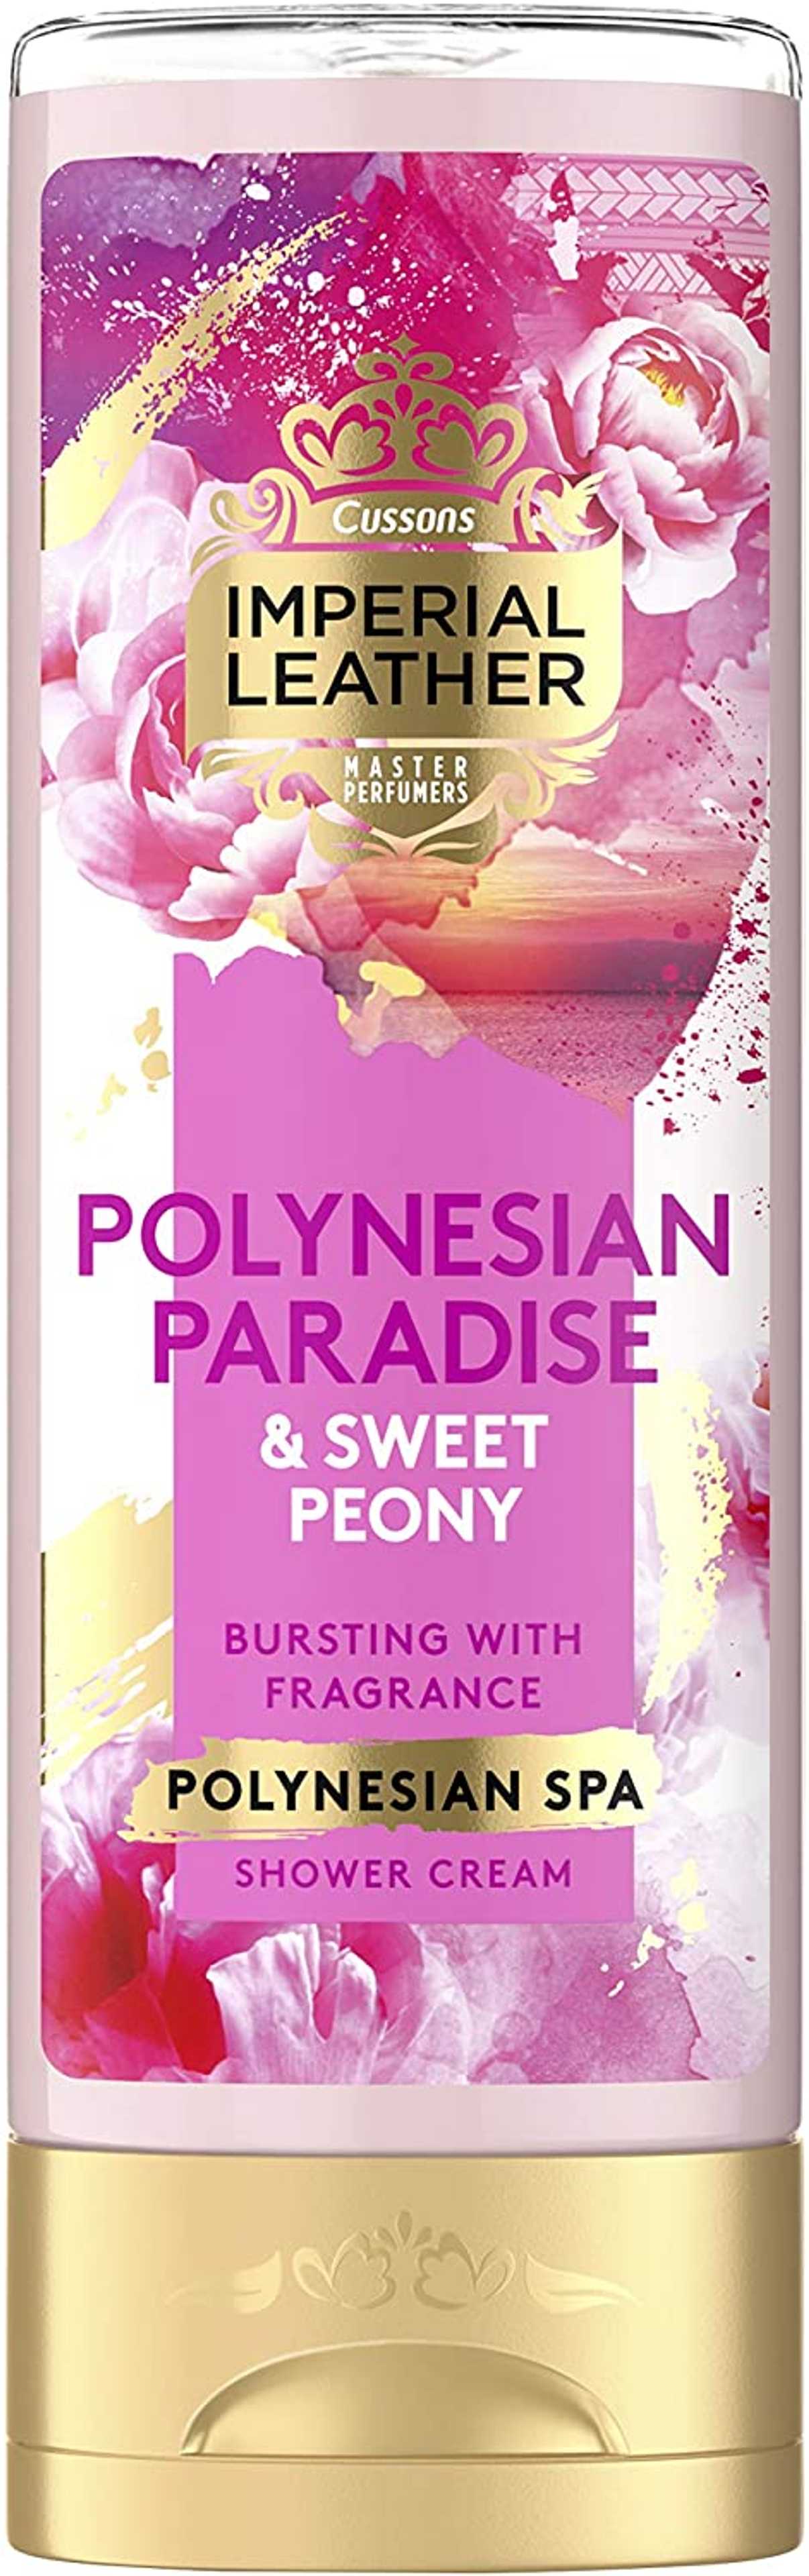 IMPERIAL LEATHER SHOWER CREAM POLYNESIAN PARADISE & SWEET PEONY 500ML (Imported)